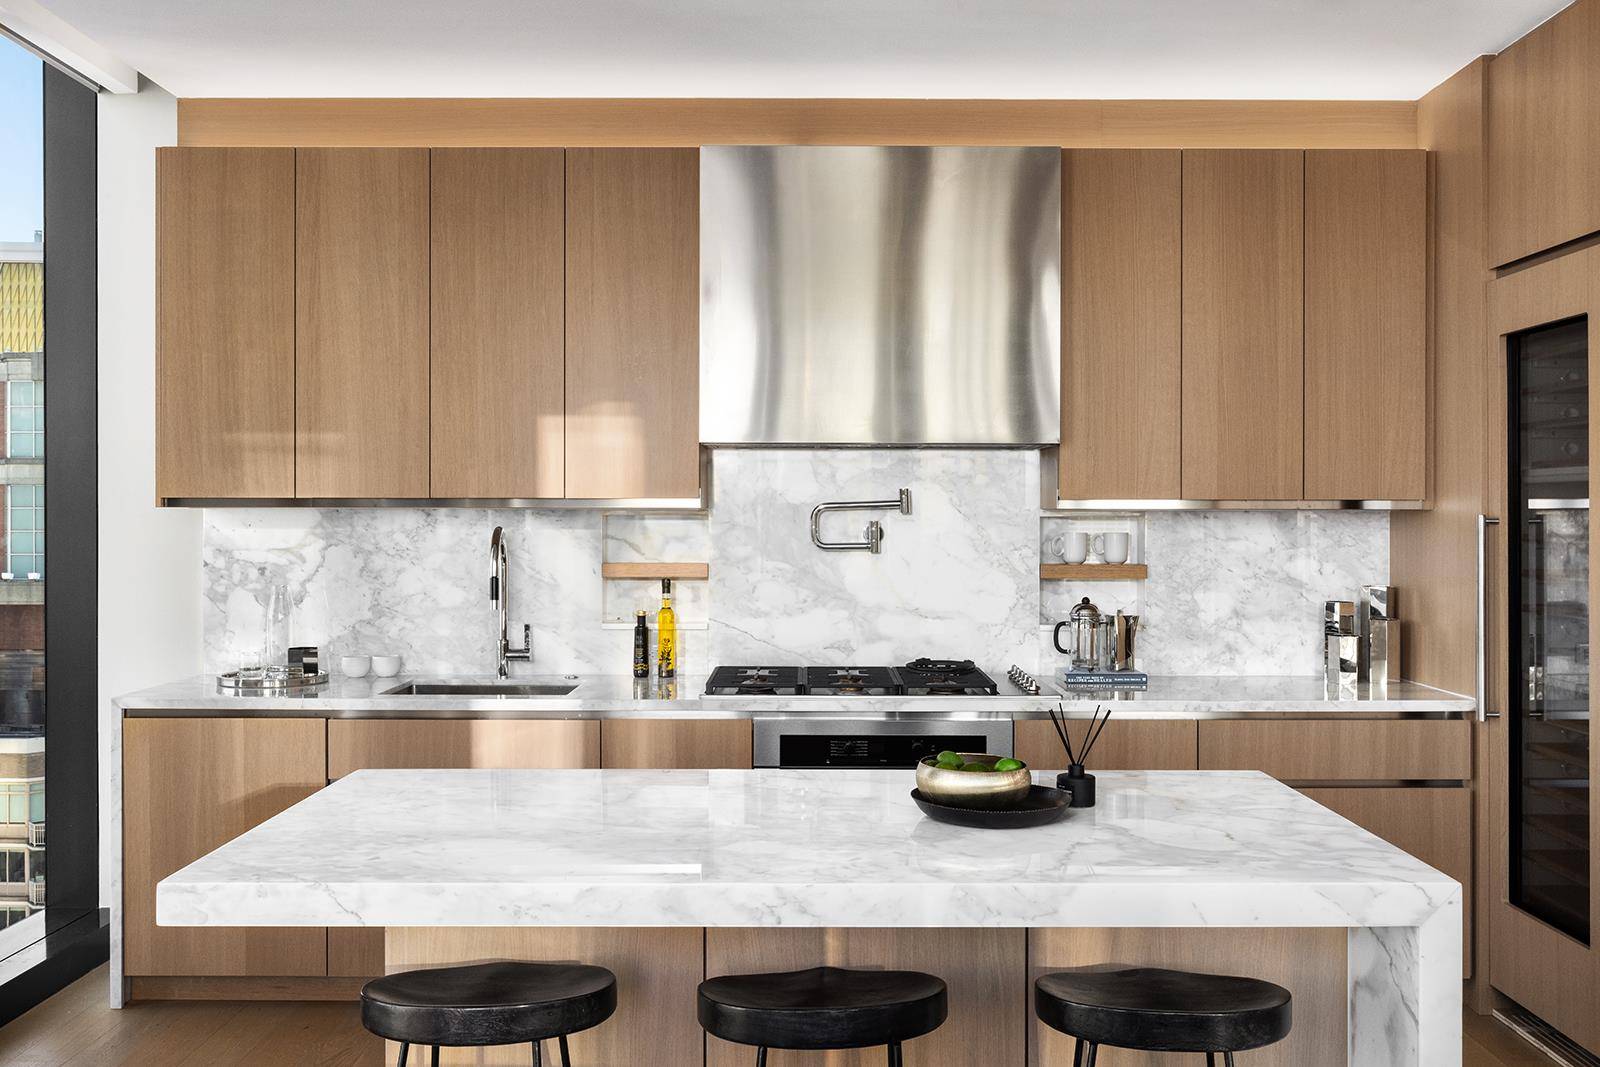 IMMEDIATE OCCUPANCY AT THE TALLEST RESIDENTIAL CONDOMINIUM ON FIFTH AVENUE.